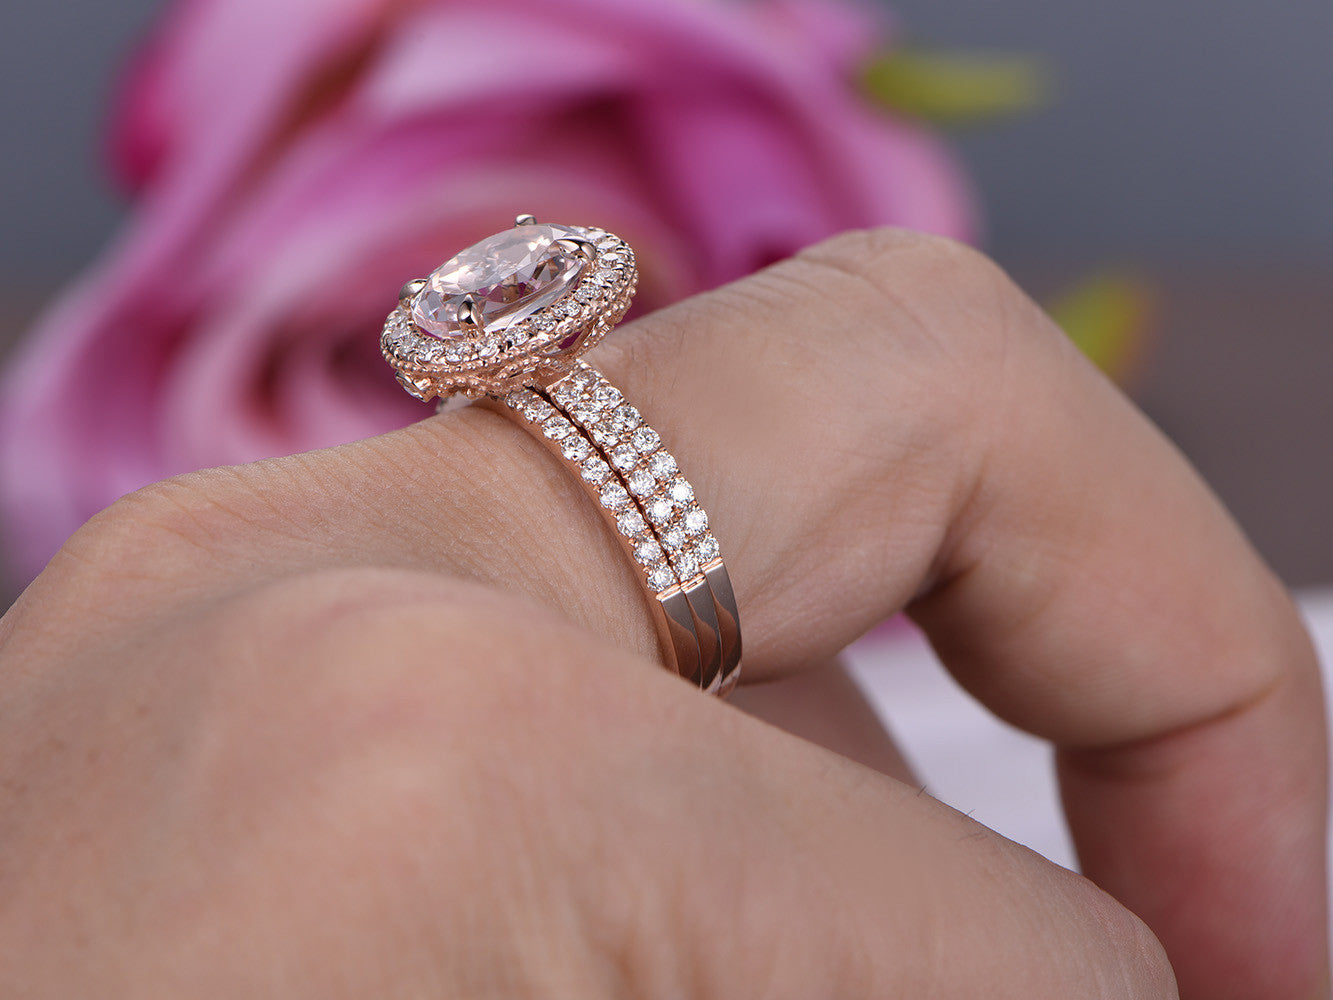 Reserved for Sara Oval Morganite Engagement Ring Trio Set Pave 1.5mm Diamonds 14K Rose Gold